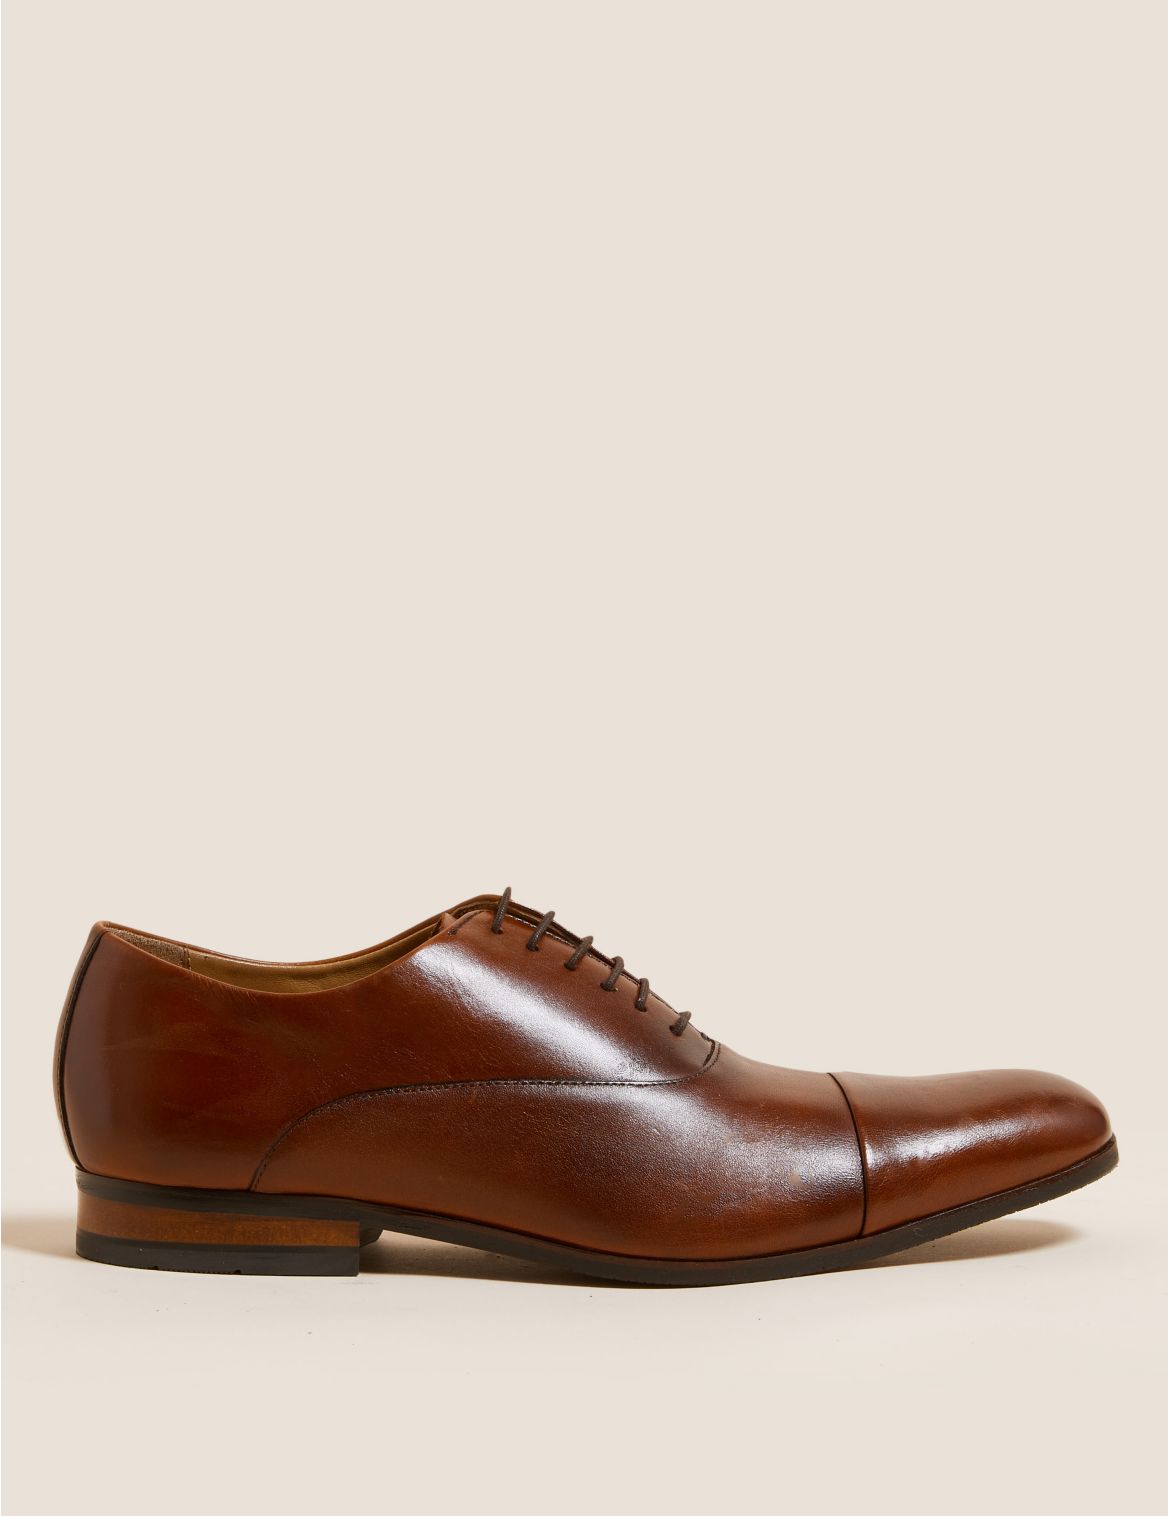 Leather Oxford Shoes brown